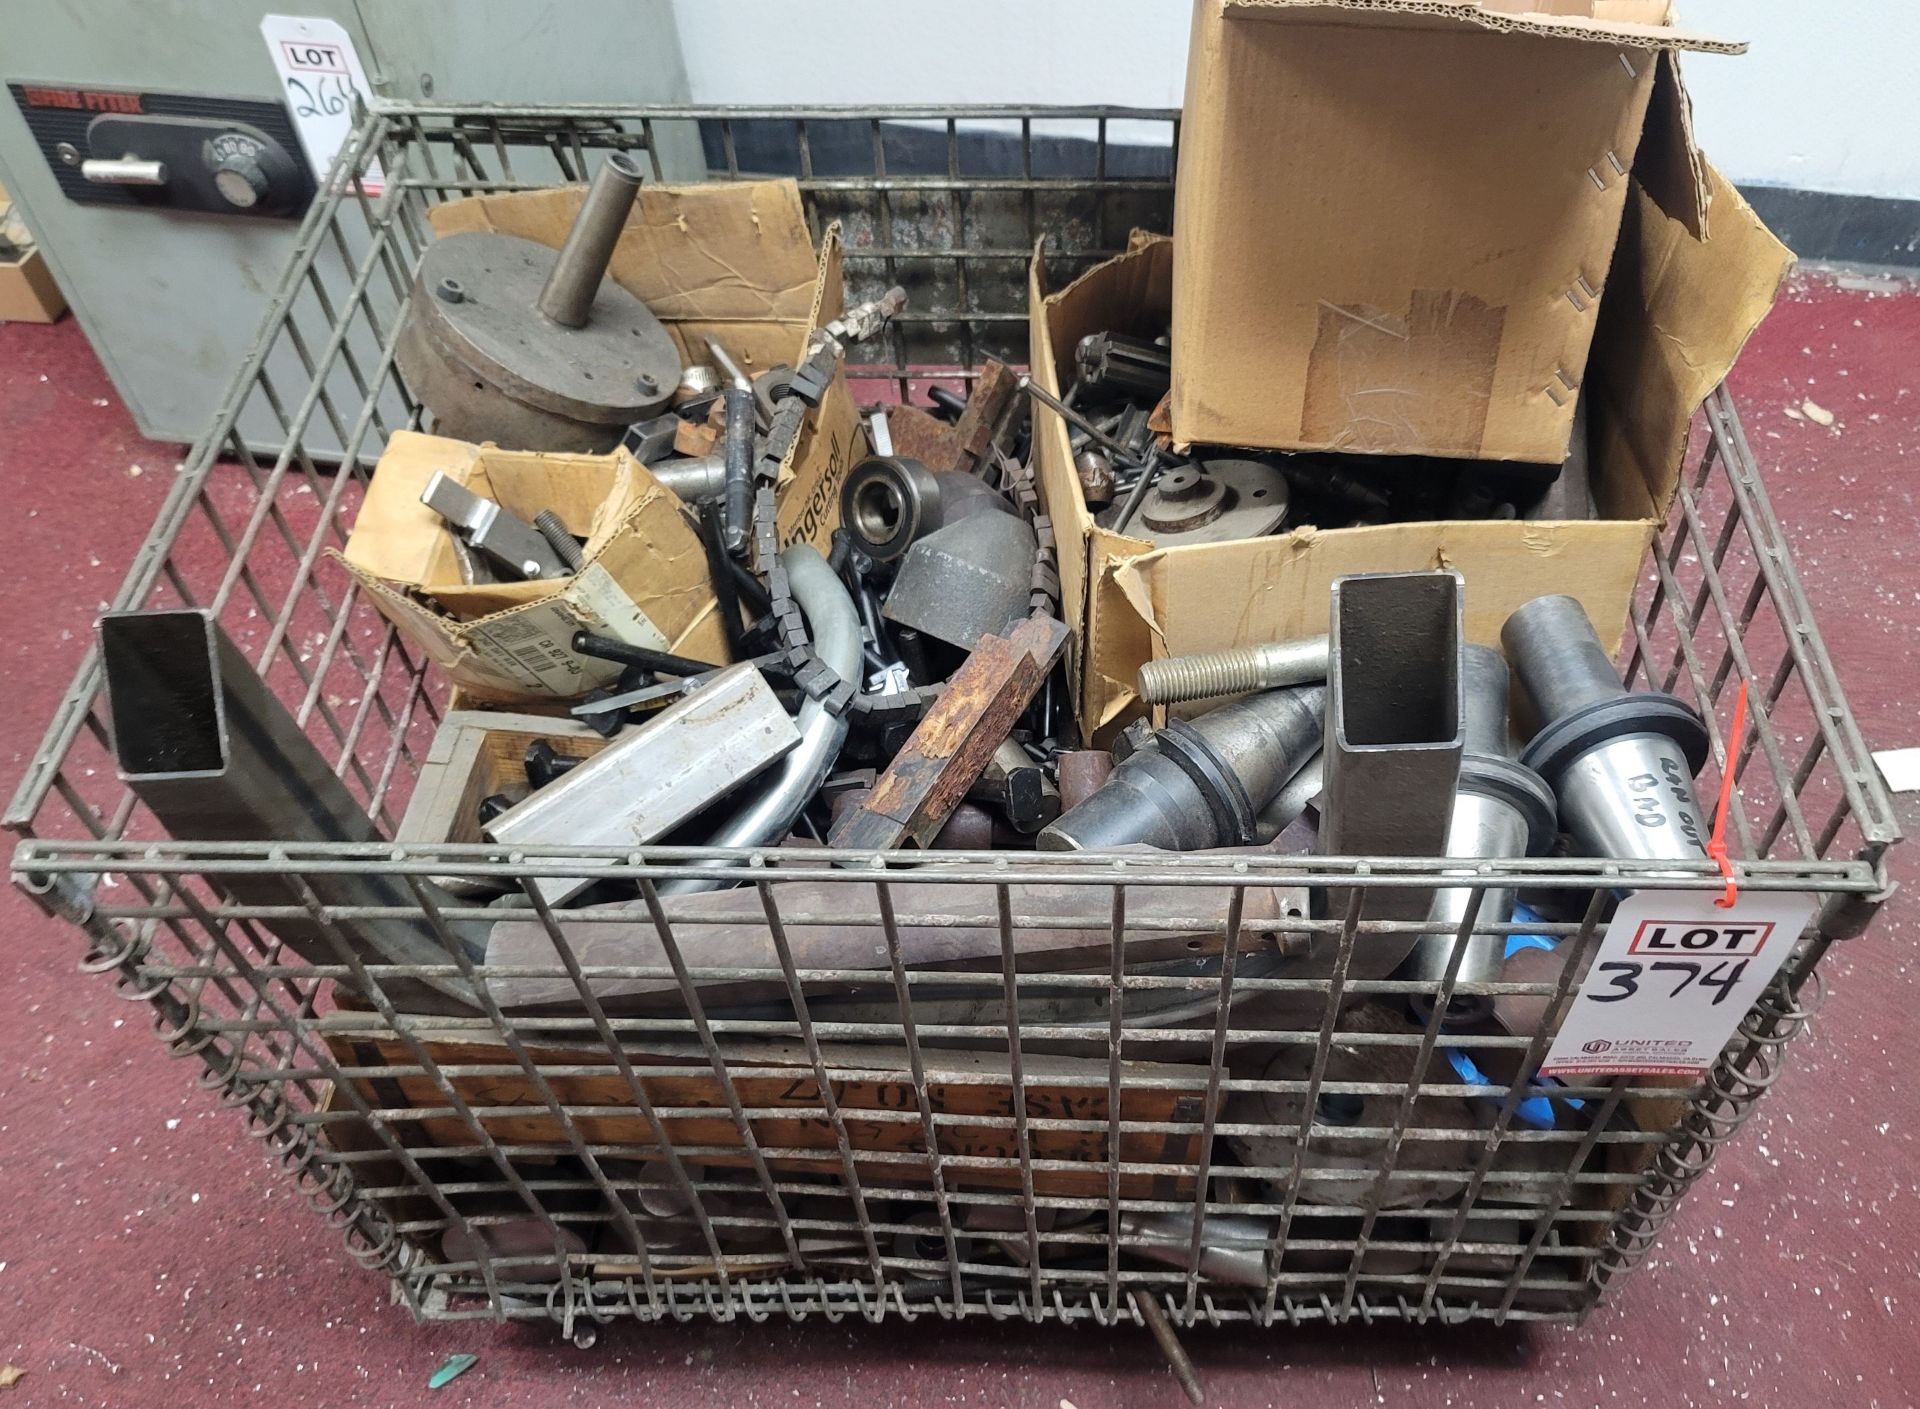 LOT - WIRE TOTE, 30" X 24" X 20" HT, W/ CONTENTS OF TOOLING AND SCRAP